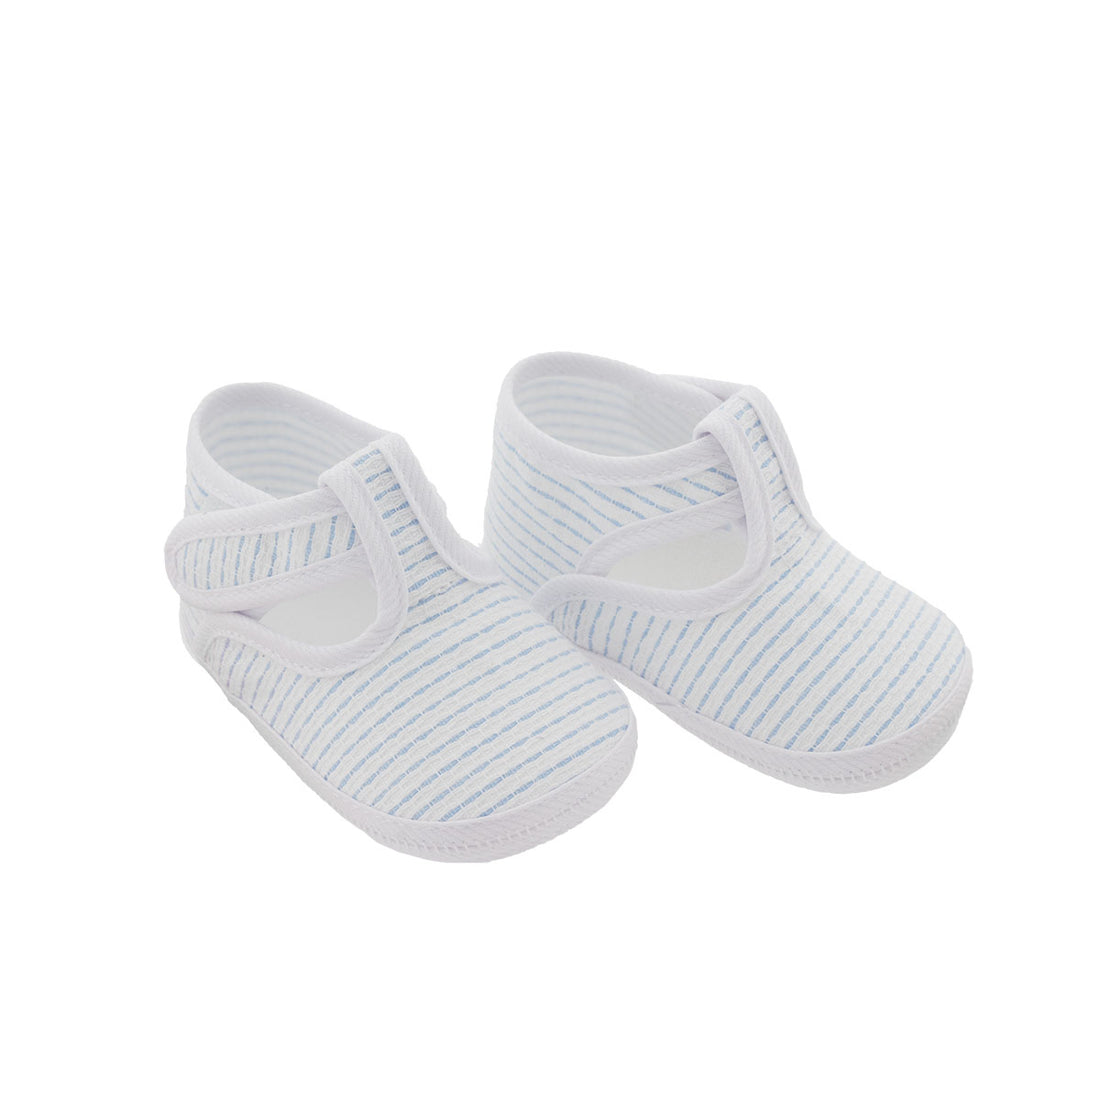 r&j-cambrass-sa-summer-baby-shoes-335-blue- (1)